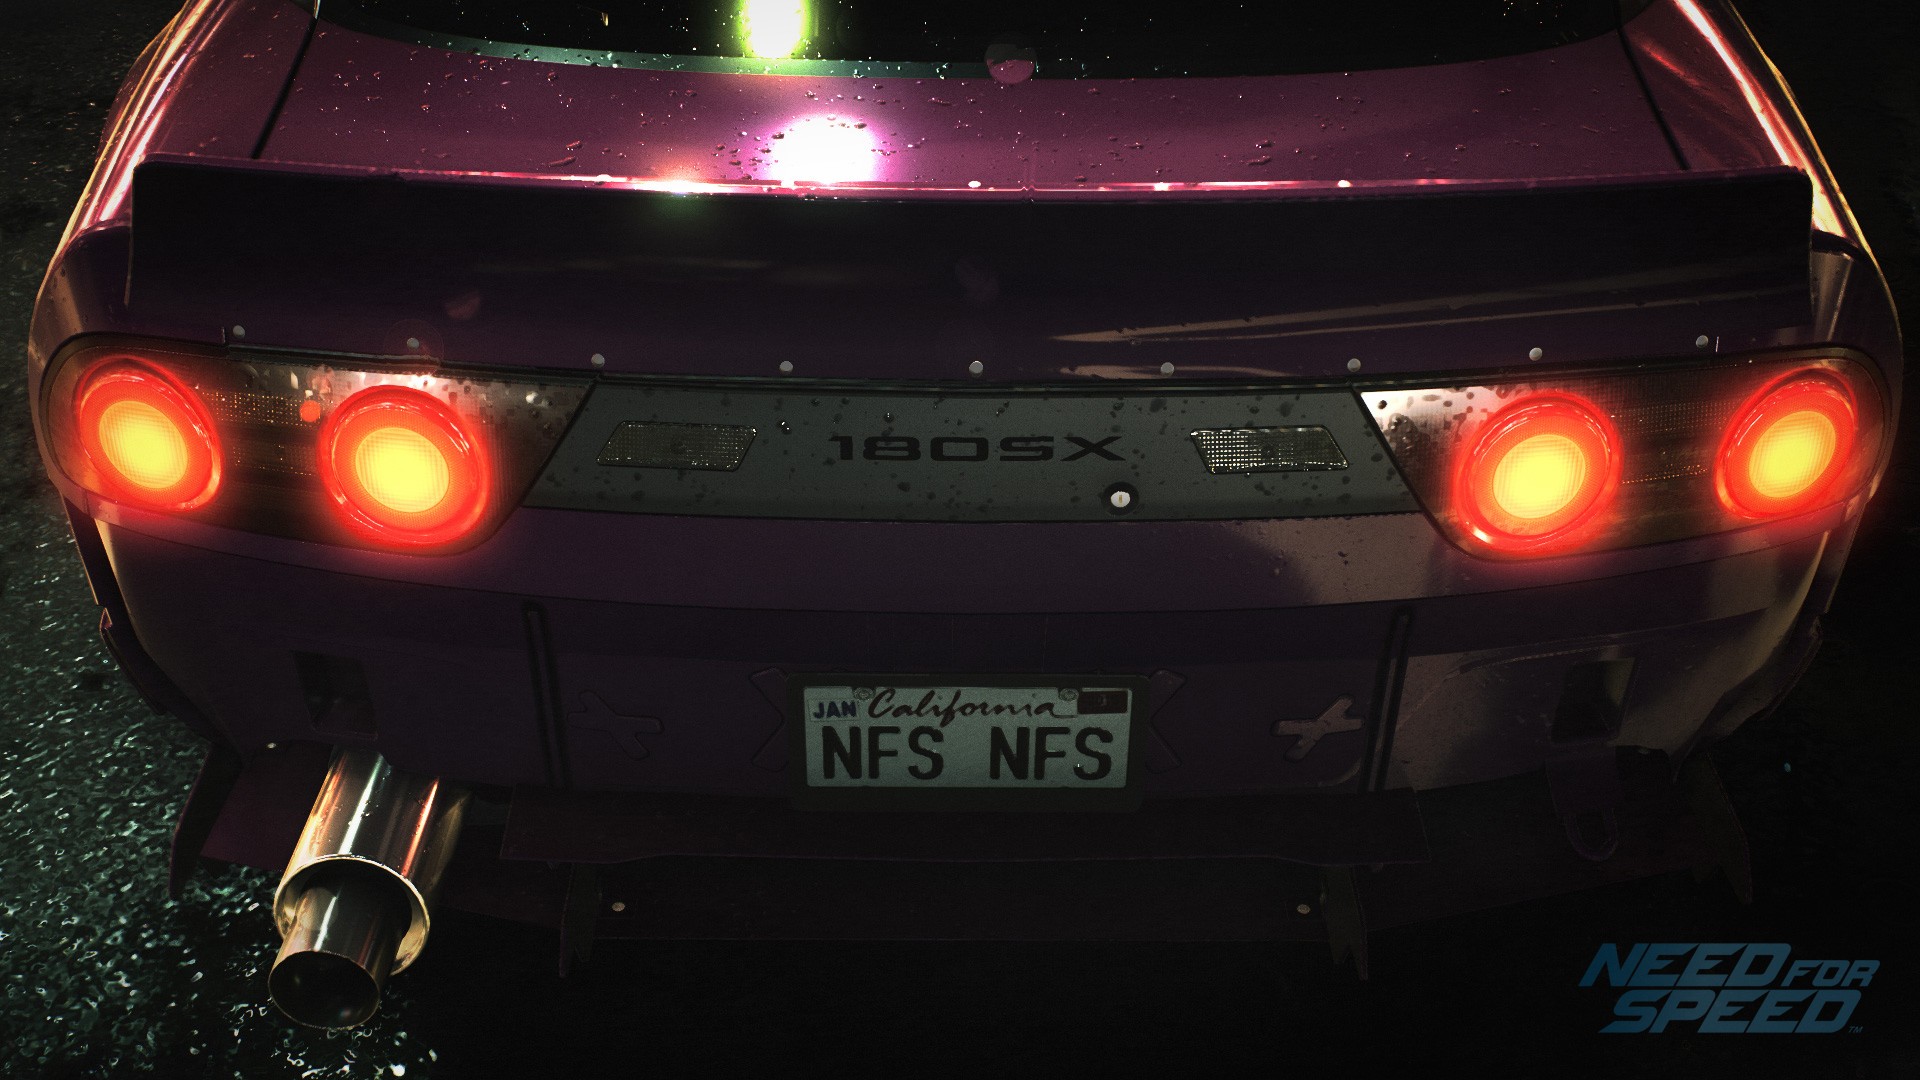 Need For Speed Racing Anime Car Video Games Nissan Nissan 180SX Nissan 200SX Nissan 240SX Nissan S13 1920x1080